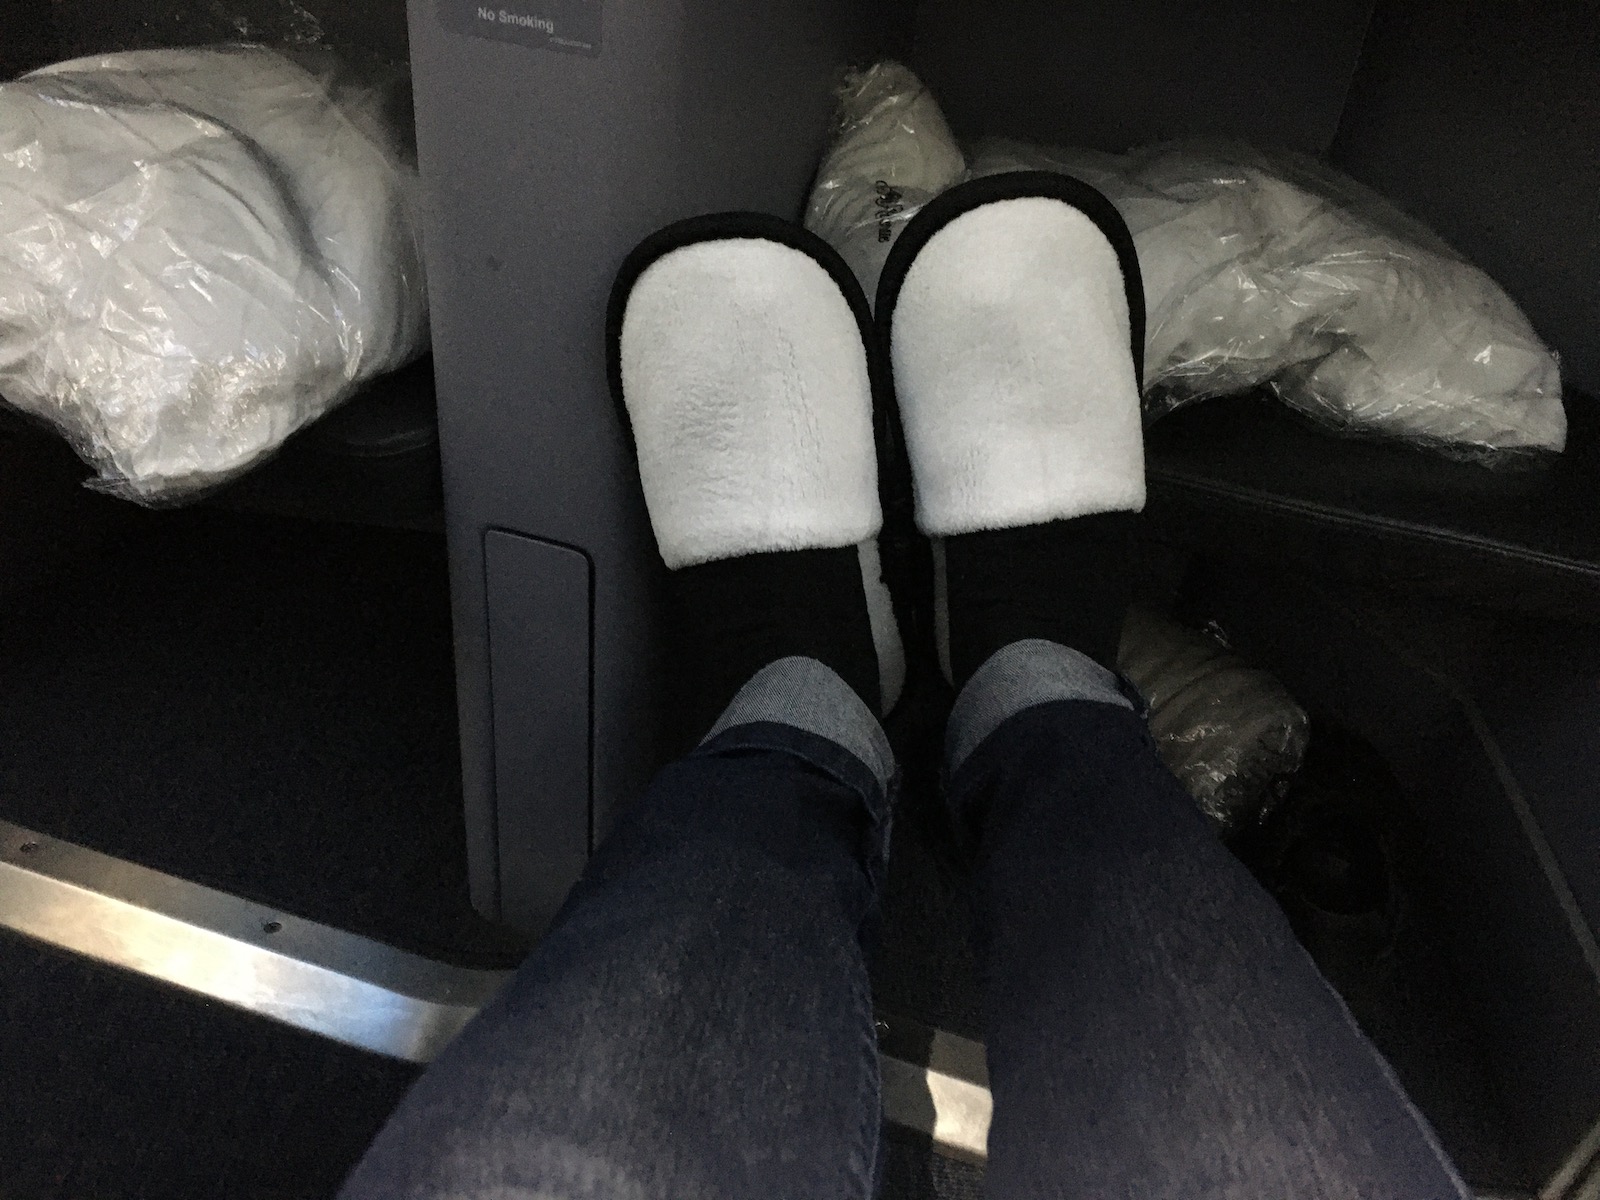 Foot well on 787 - United Polaris business class review